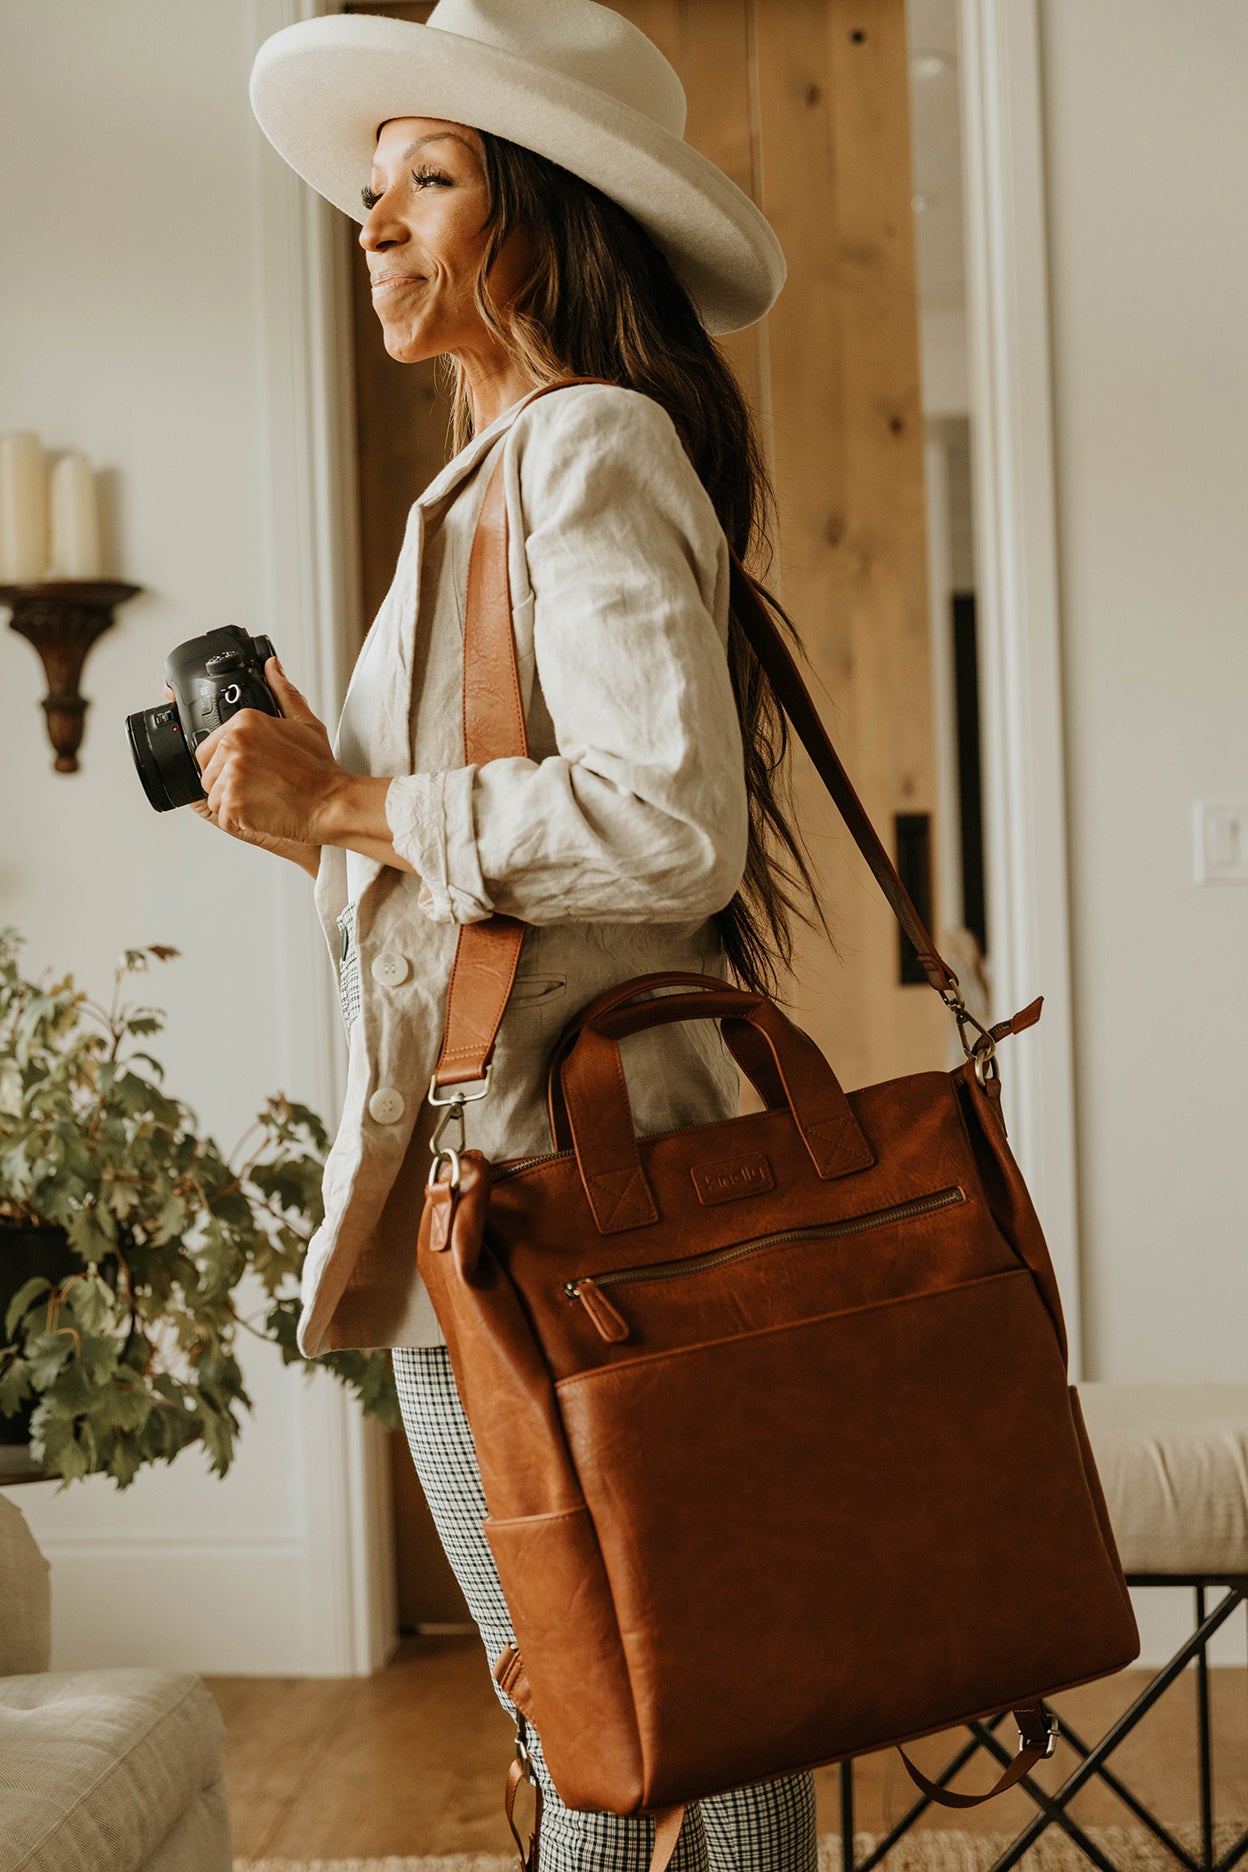 The Courtney - Our Full Size Versatile Camera Bag